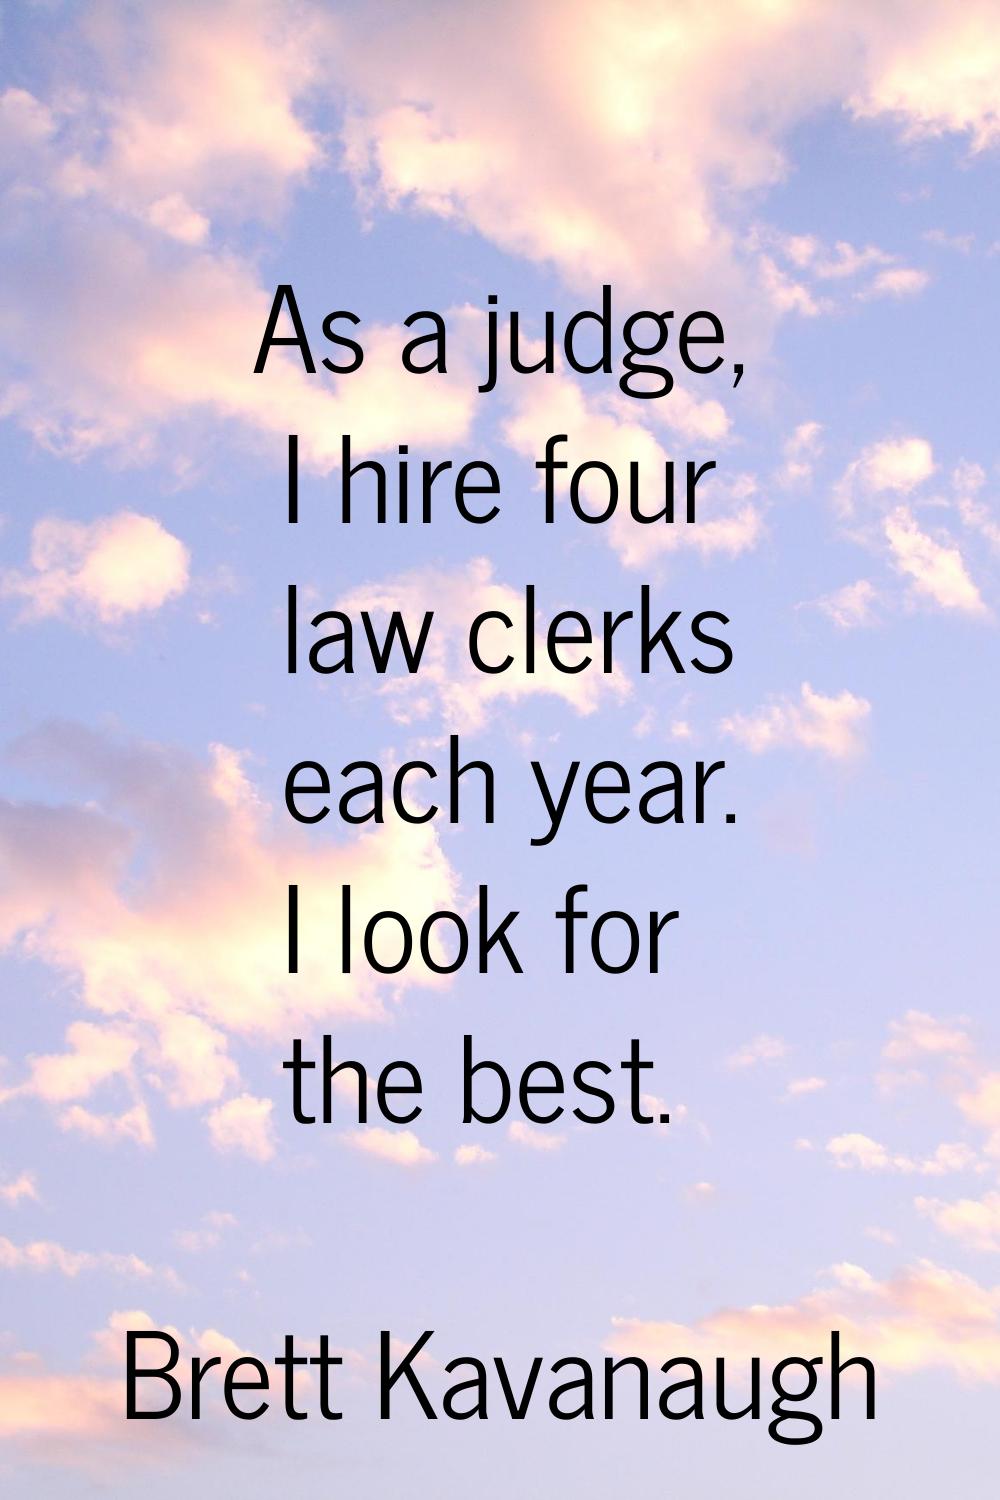 As a judge, I hire four law clerks each year. I look for the best.